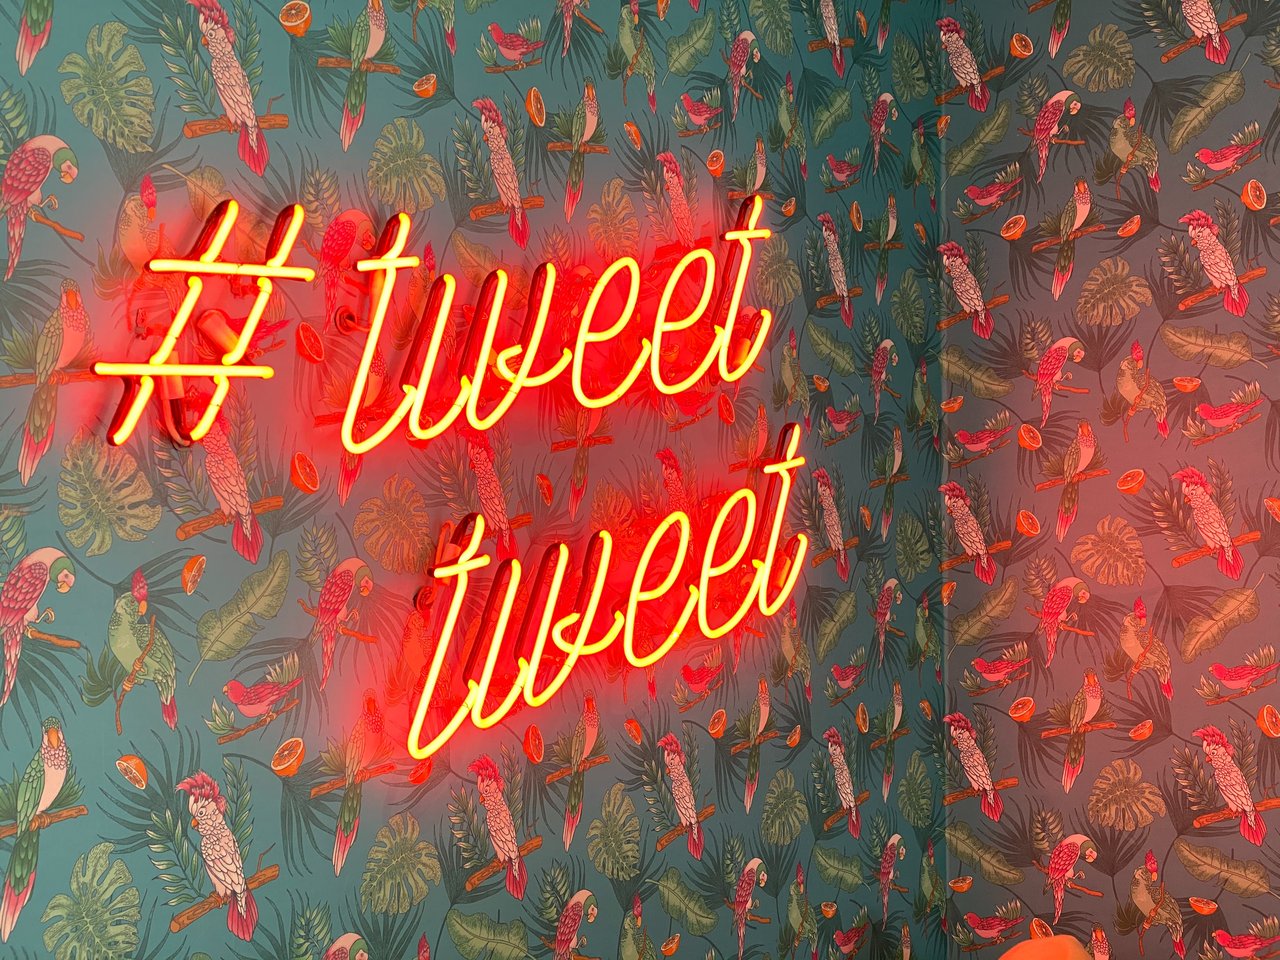 An orange neon sign on a wallpapered wall. The wallpaper is blue with drawings of birds, and the neon sign says '#tweettweet' in cursive lettering.